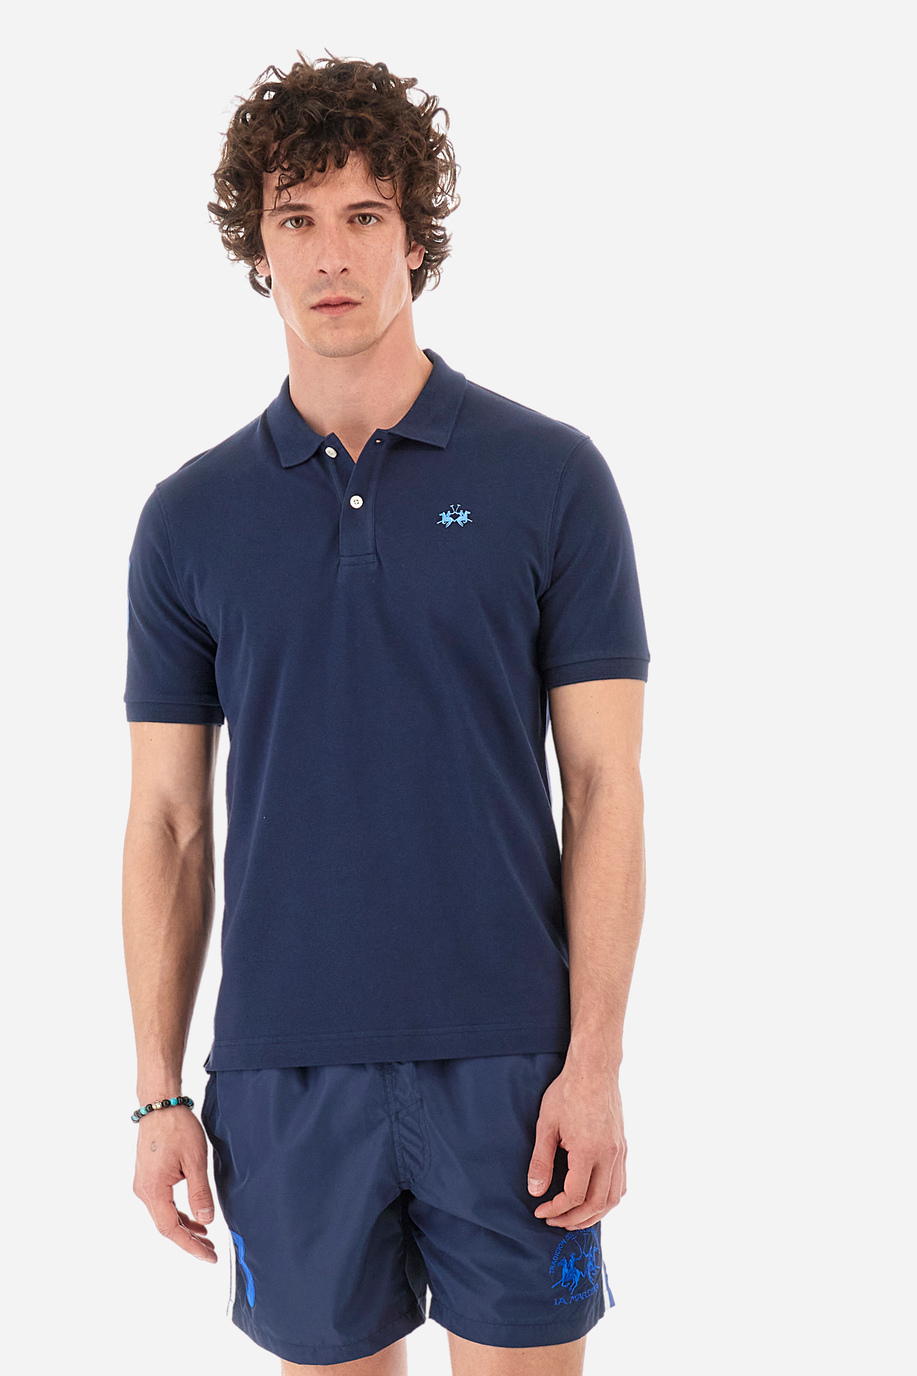 Regular-fit polo shirt in elasticated cotton - Ray - XLarge sizes | La Martina - Official Online Shop